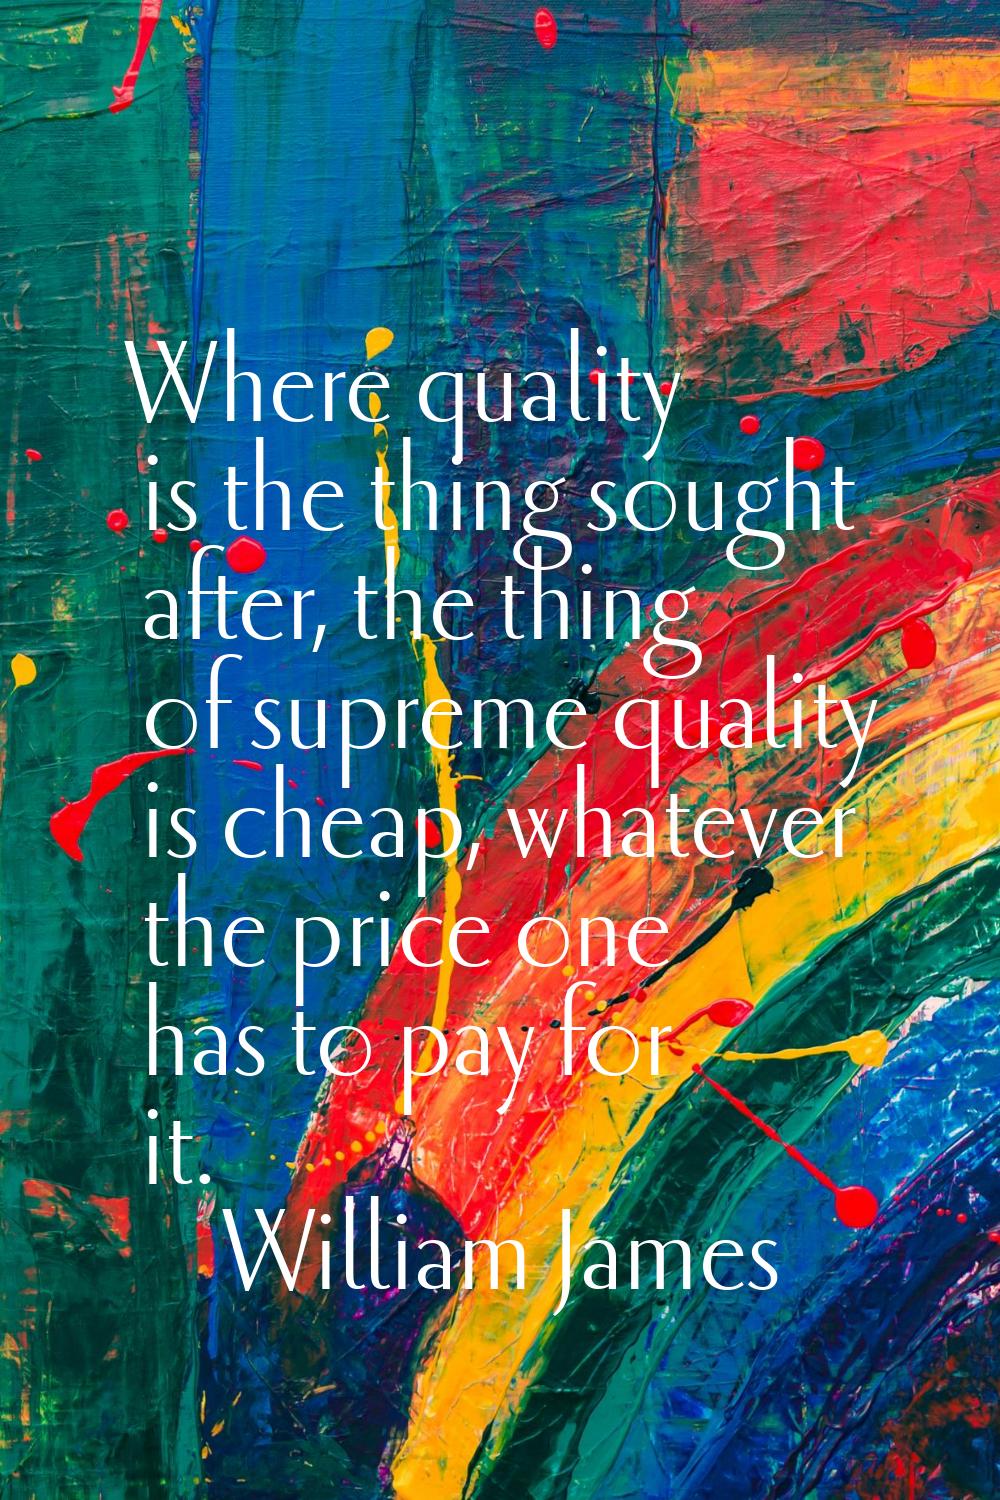 Where quality is the thing sought after, the thing of supreme quality is cheap, whatever the price 